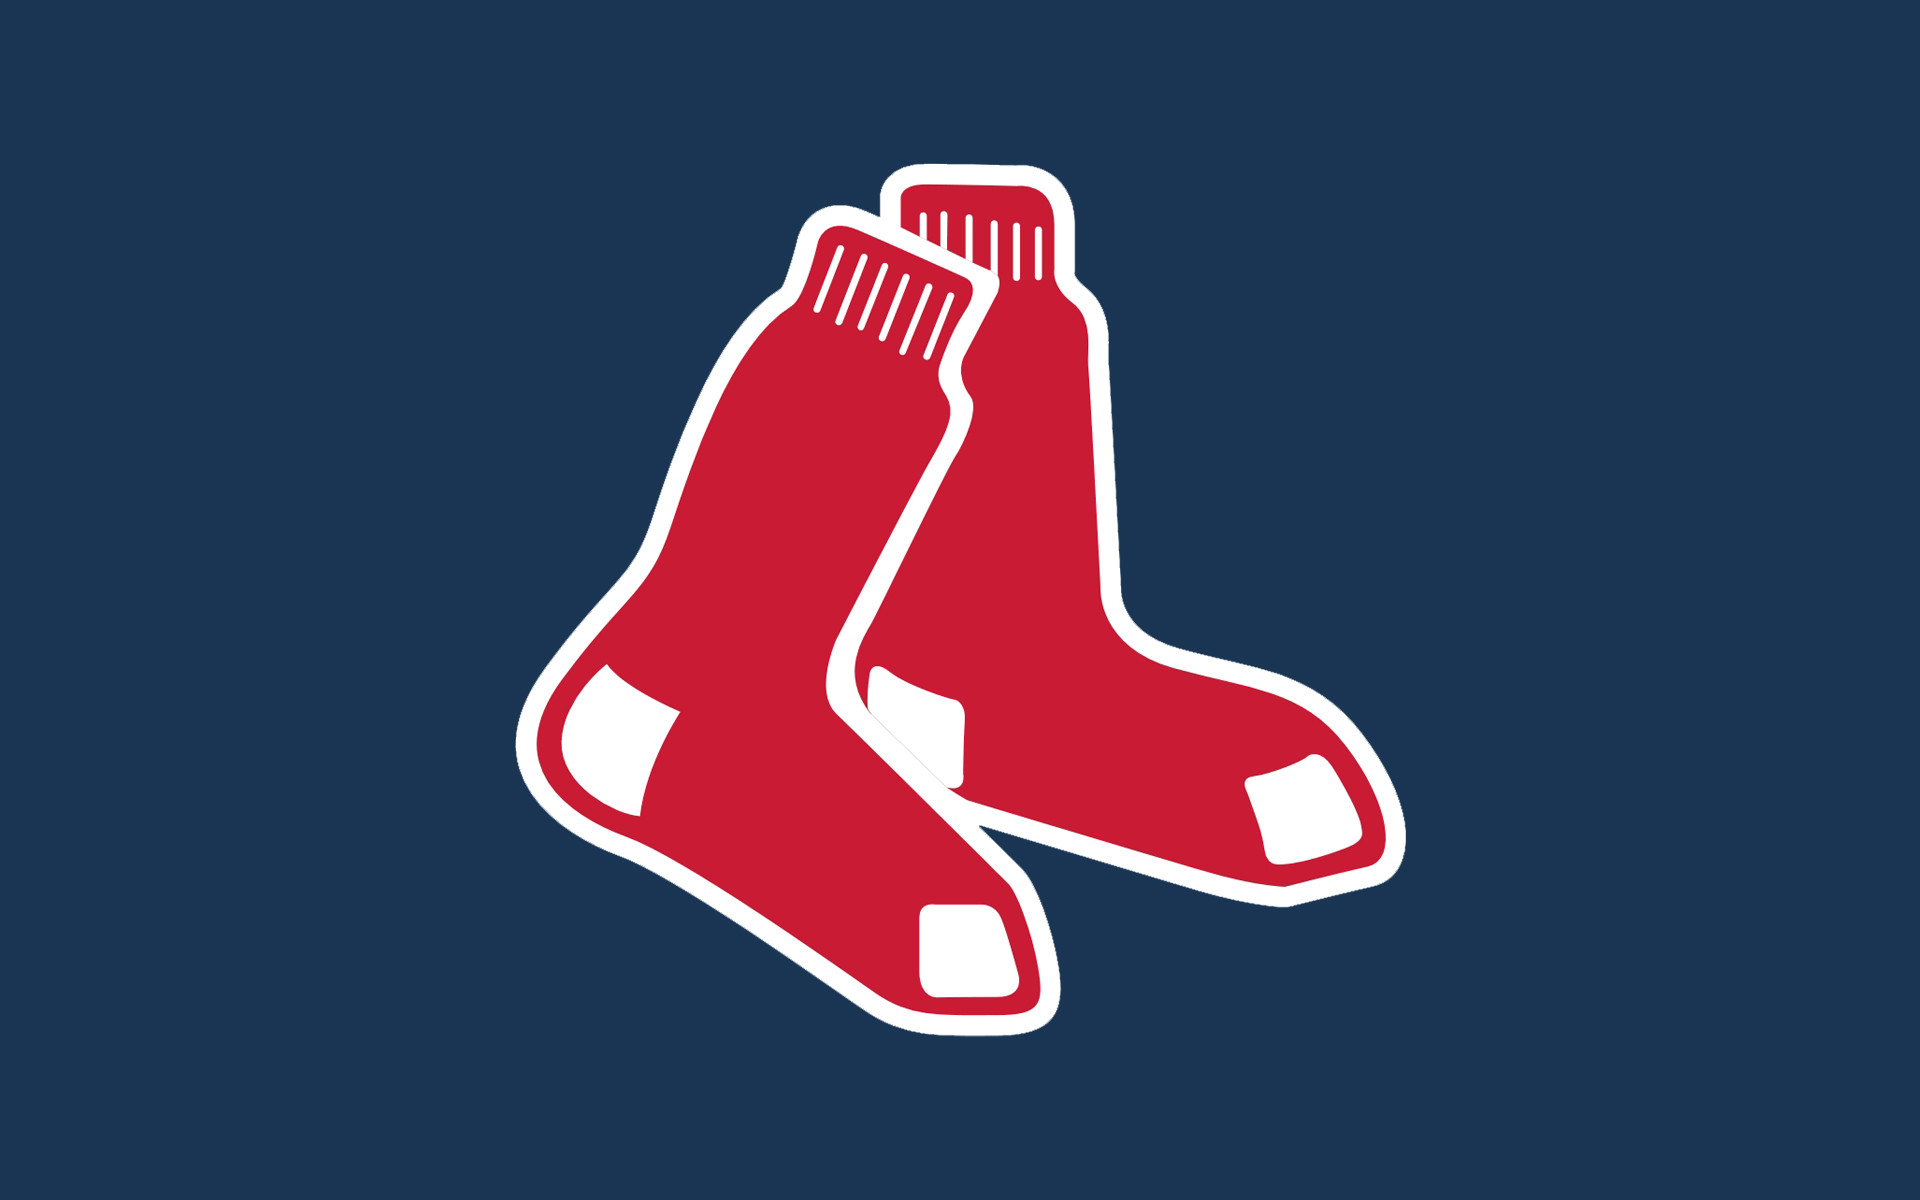 1920x1200 Boston Red Sox wallpapers | Boston Red Sox background